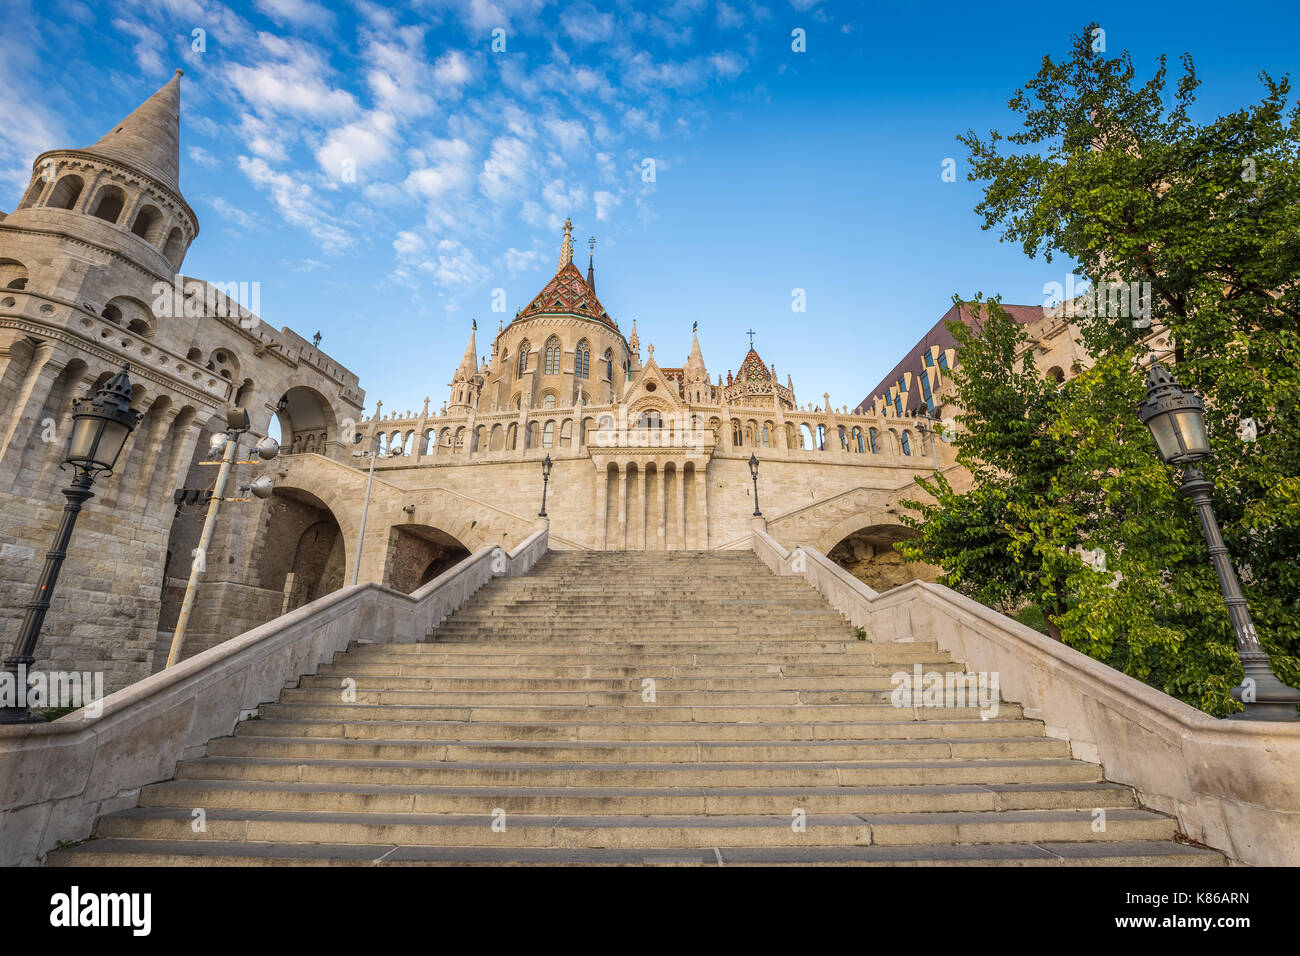 Budapest, Hungary - The beautiful stairs of the Fisherman bastion with the Matthias Church in the morning with blue sky Stock Photo